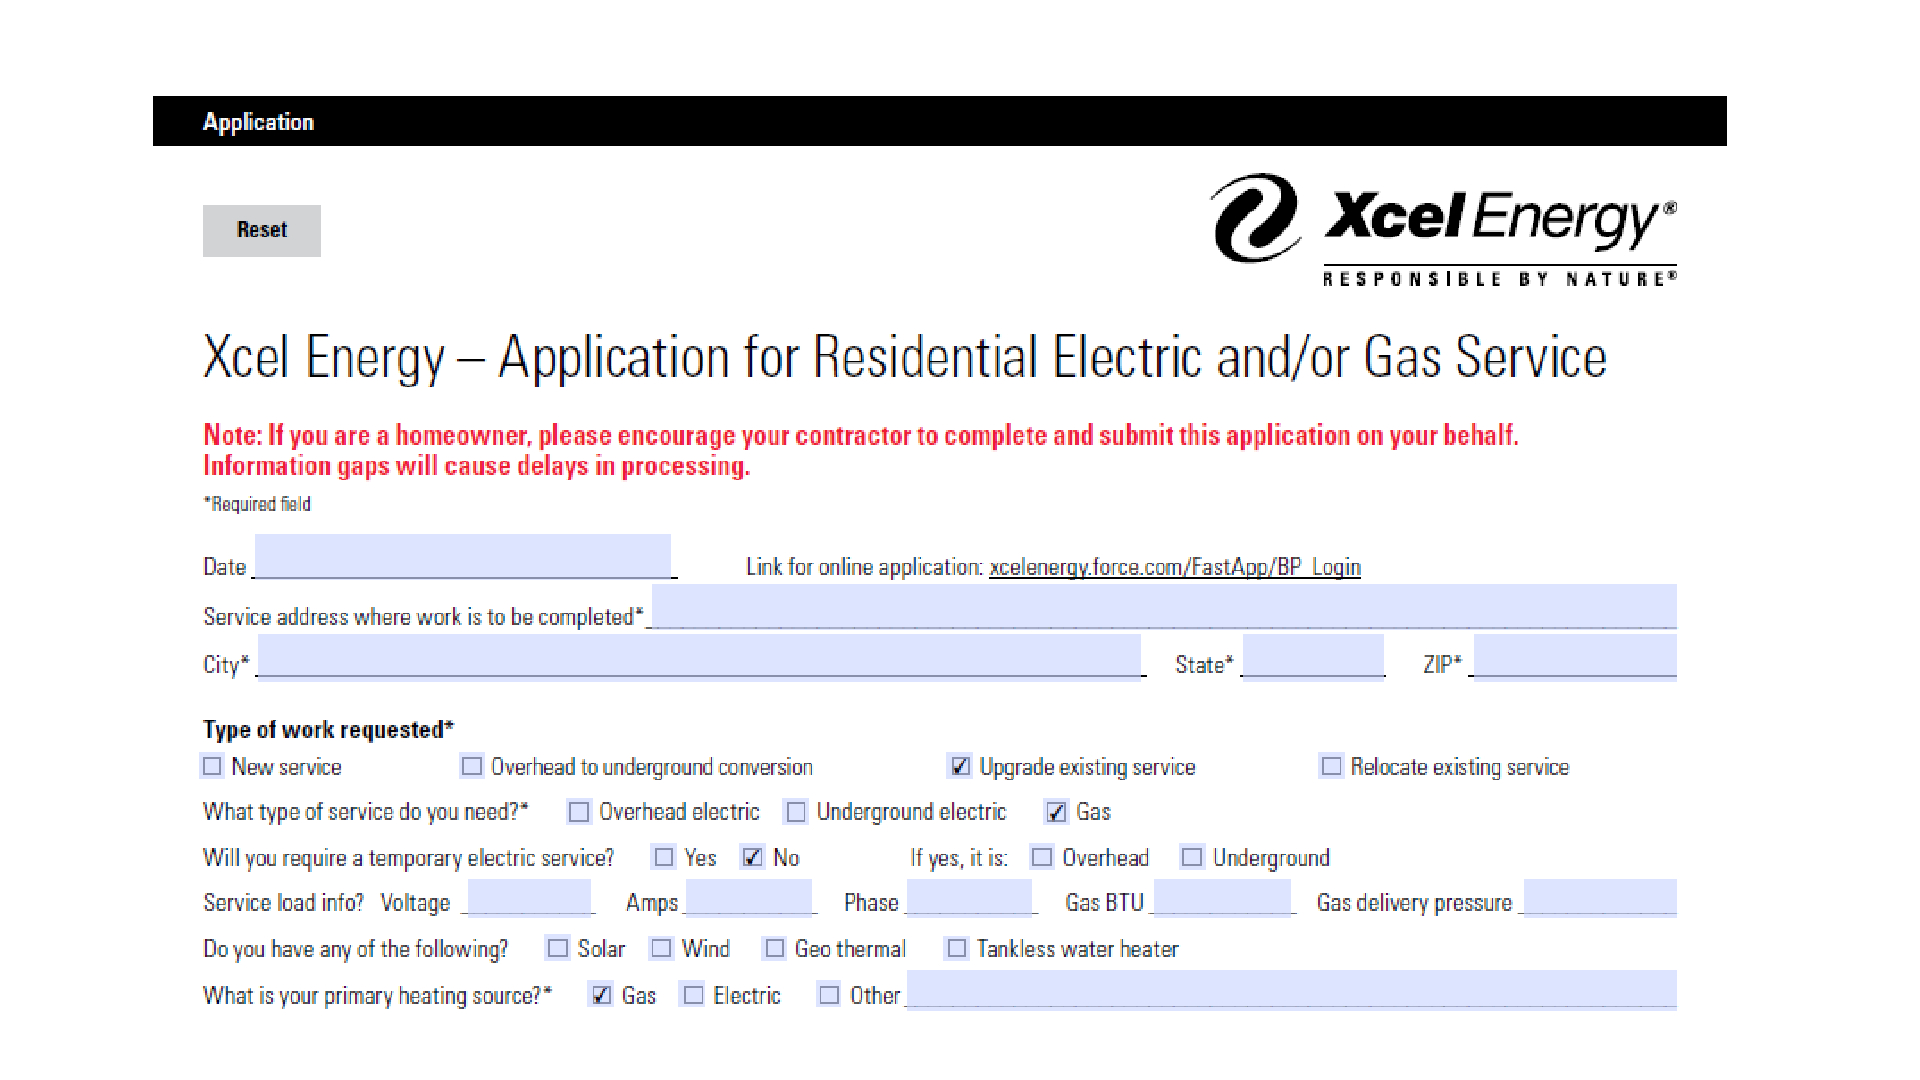 Guide to Xcel Energy’s Meter Upgrade Process form